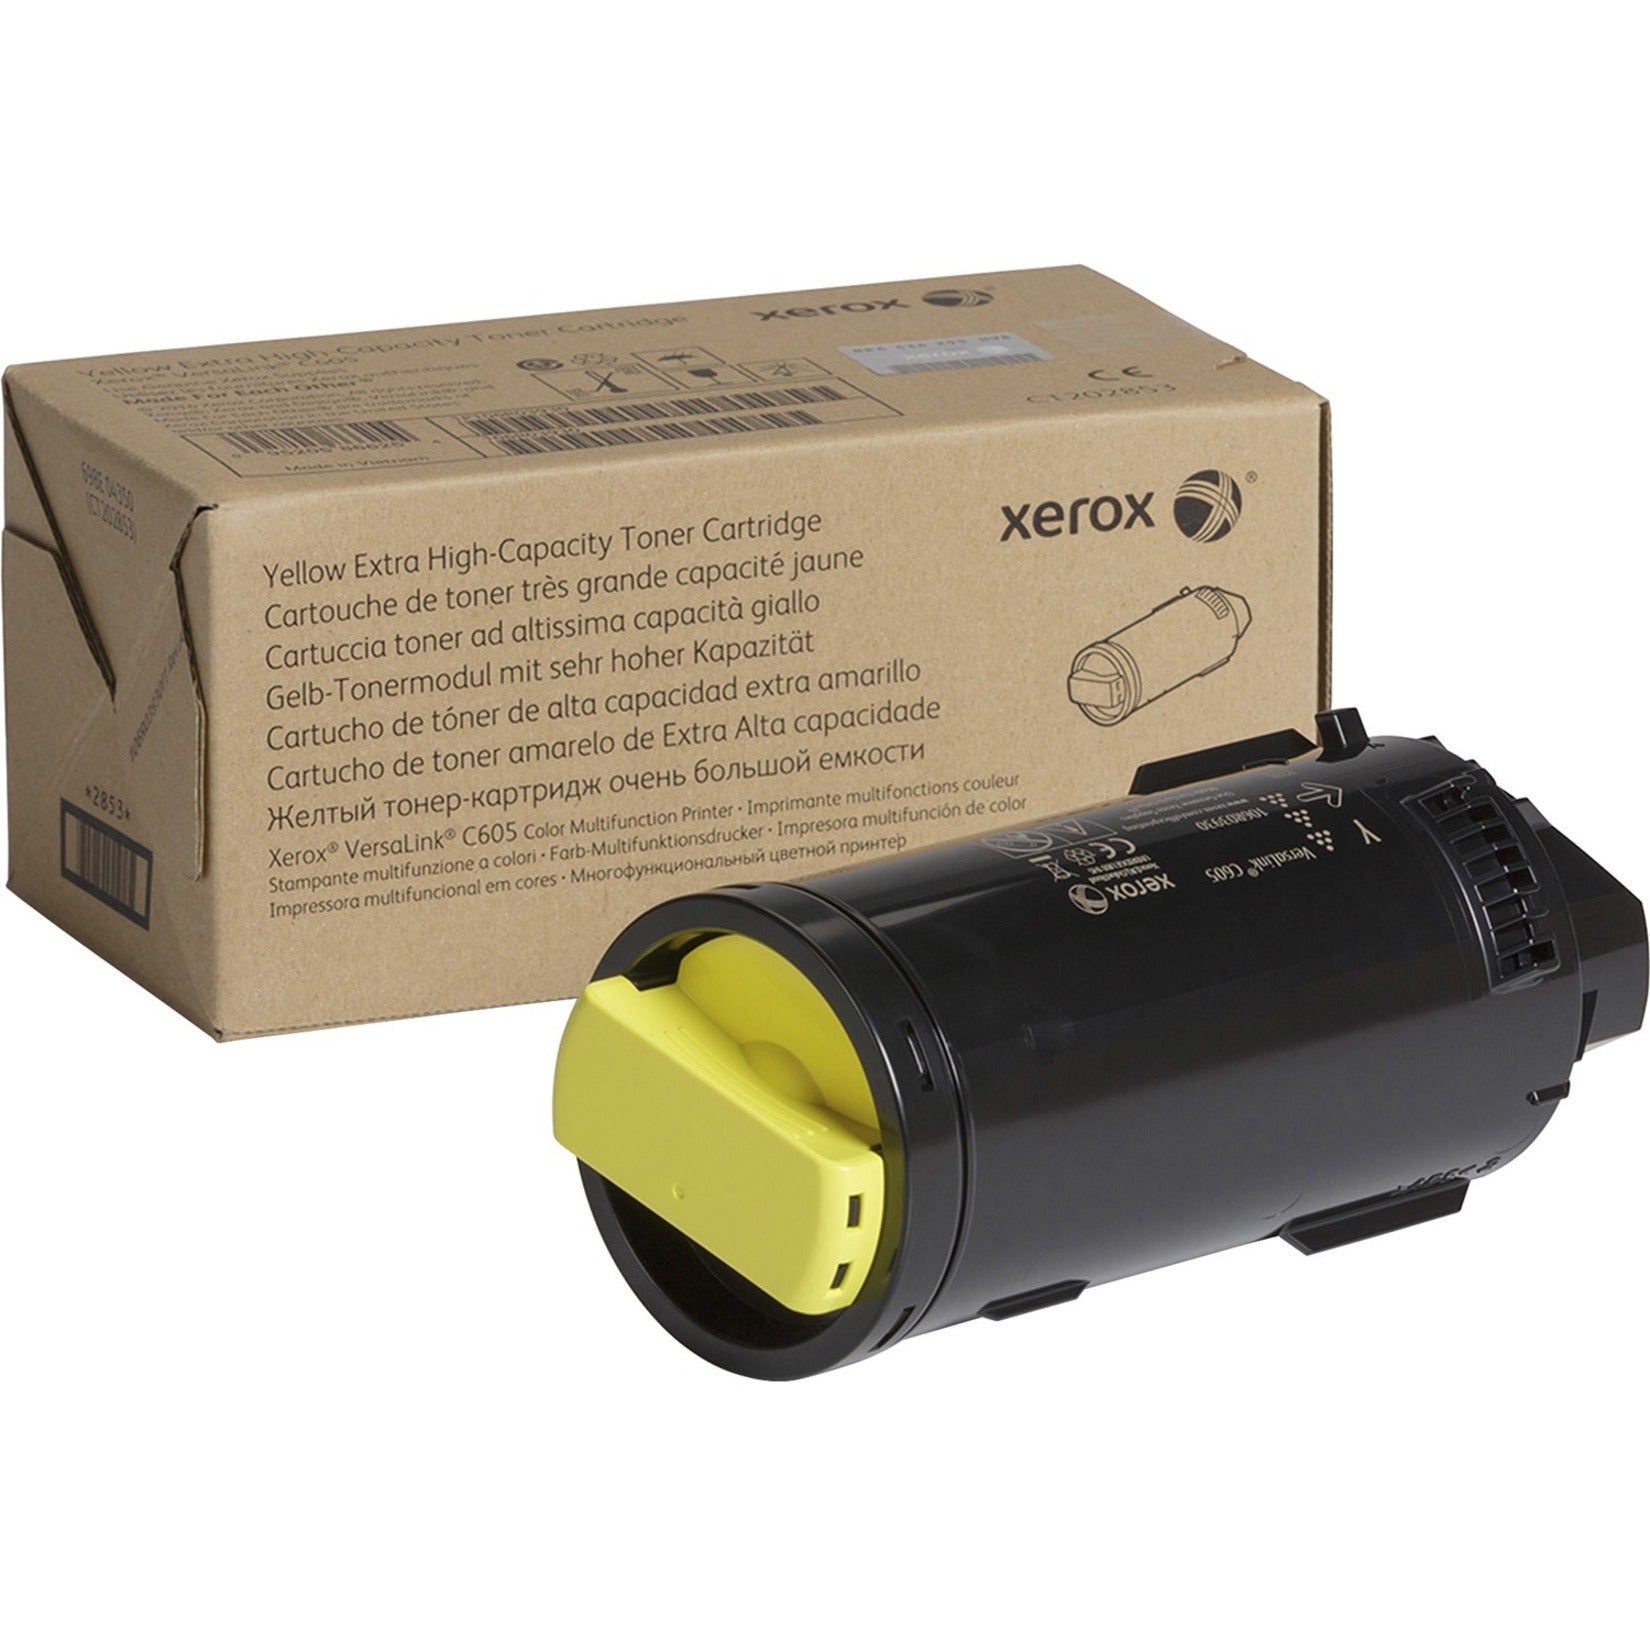 Xerox 106R04012 Toner Cartridge, Extra High Yield, Yellow, 16800 Pages